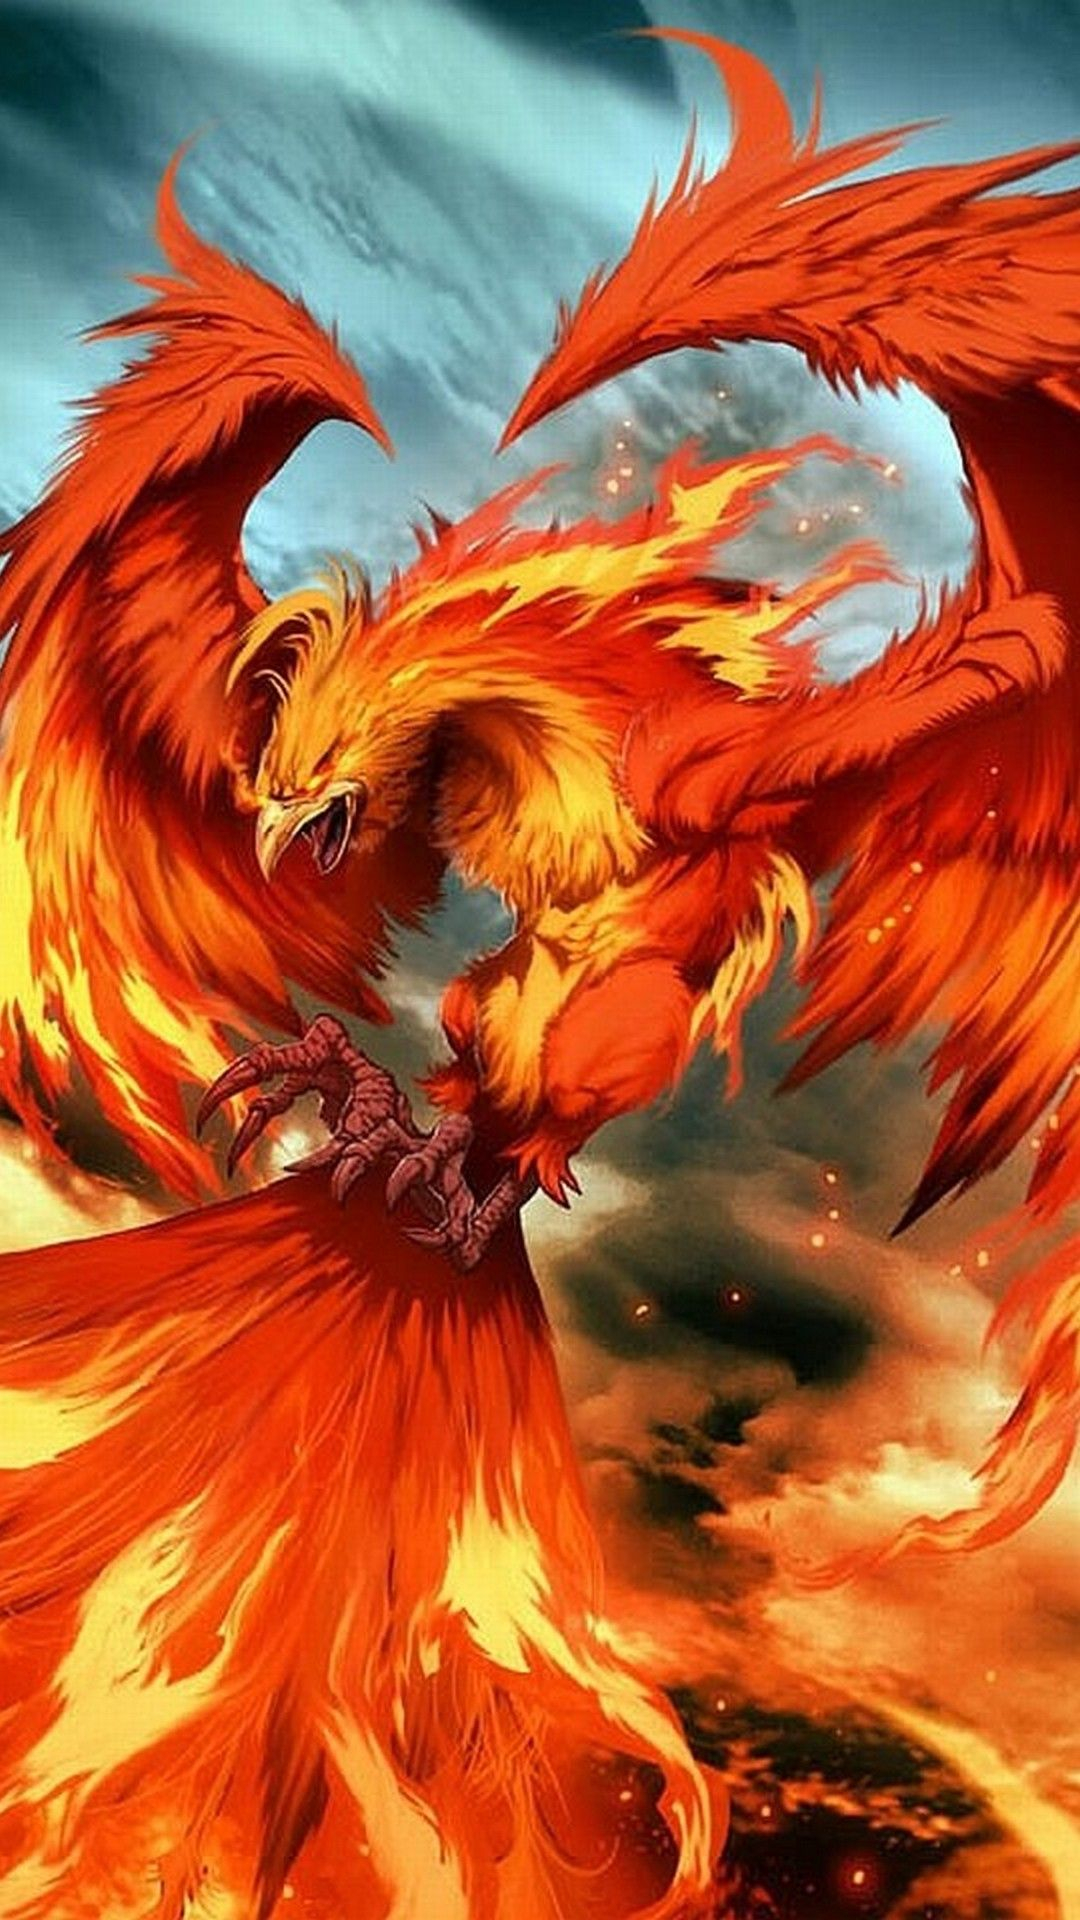 1080x1920 Phoenix Images Wallpaper For Android Best Mobile Wallpaper | Phoenix images, Phoenix wallpaper, Phoenix artwork